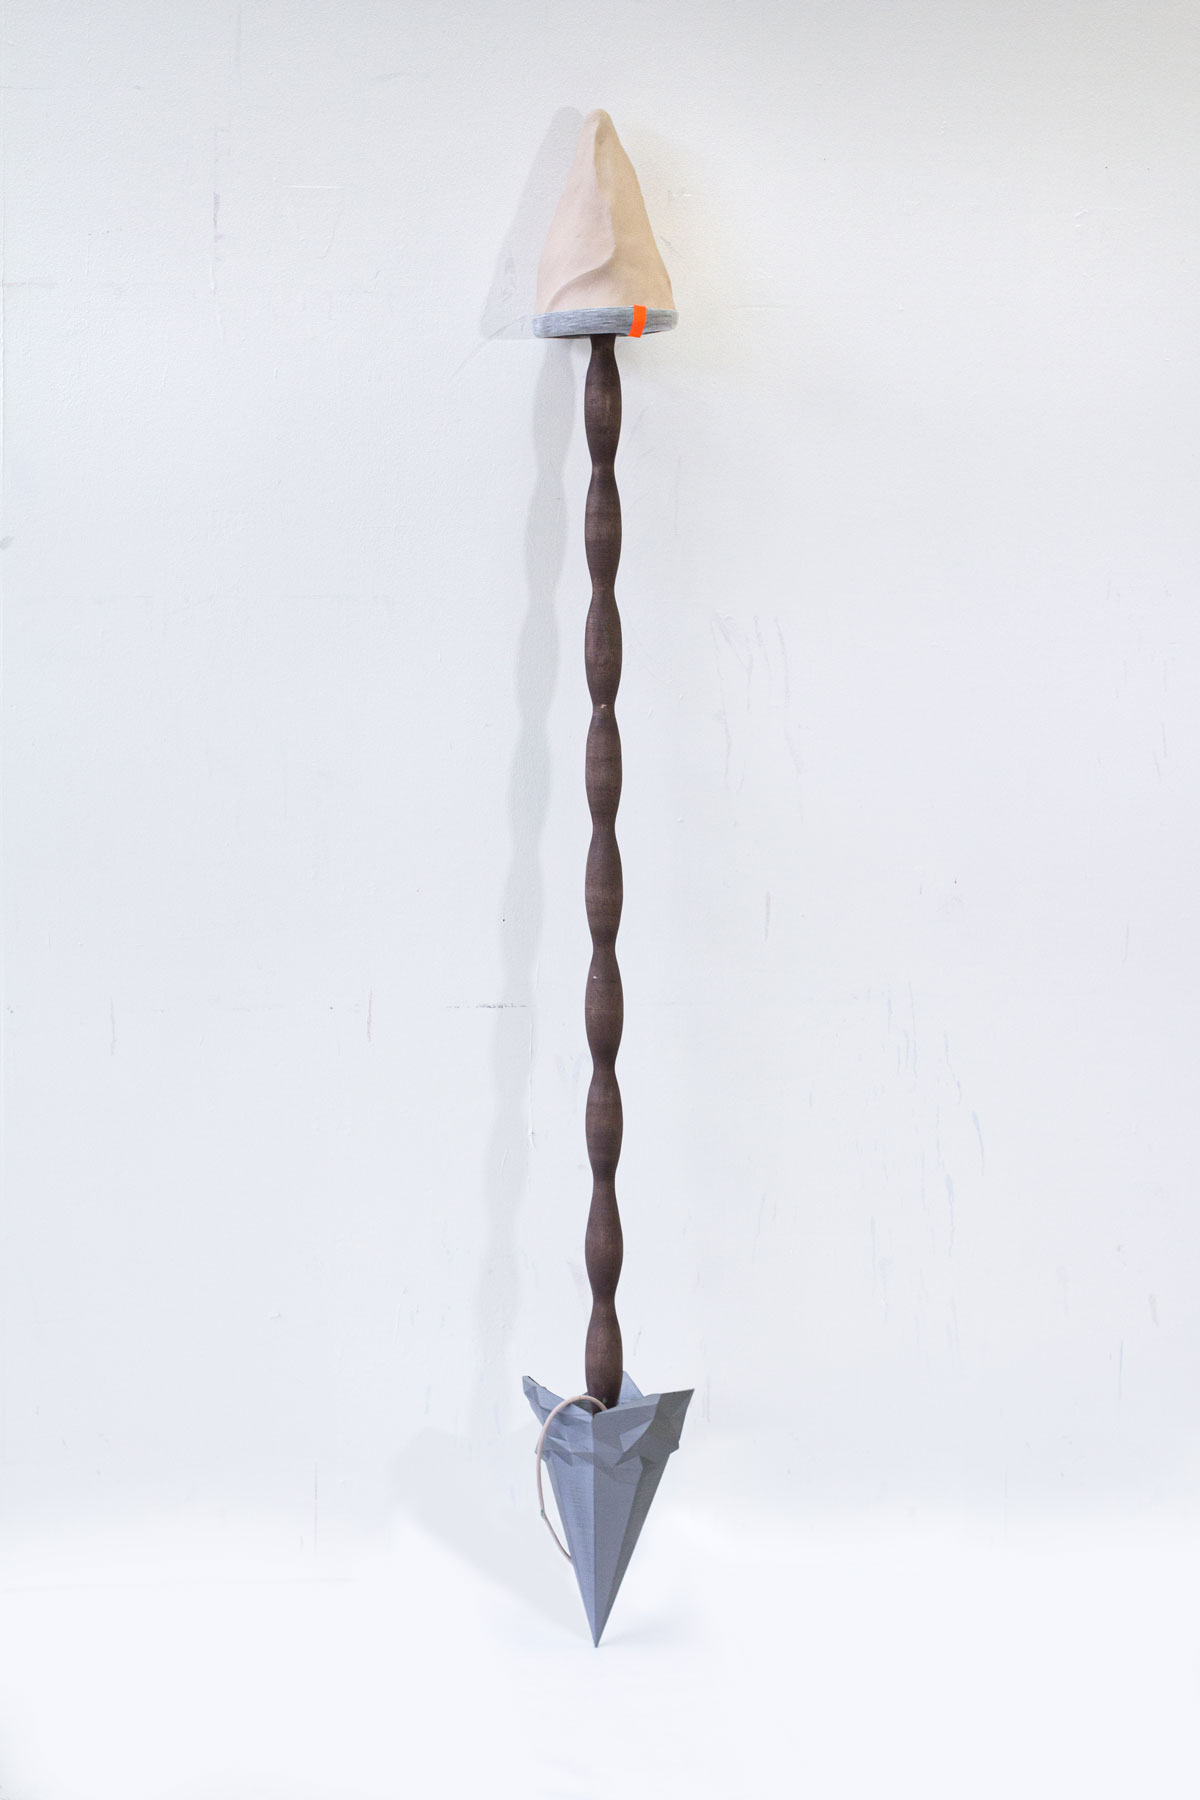 An abstract metal sculpture in the shape of an arrow.